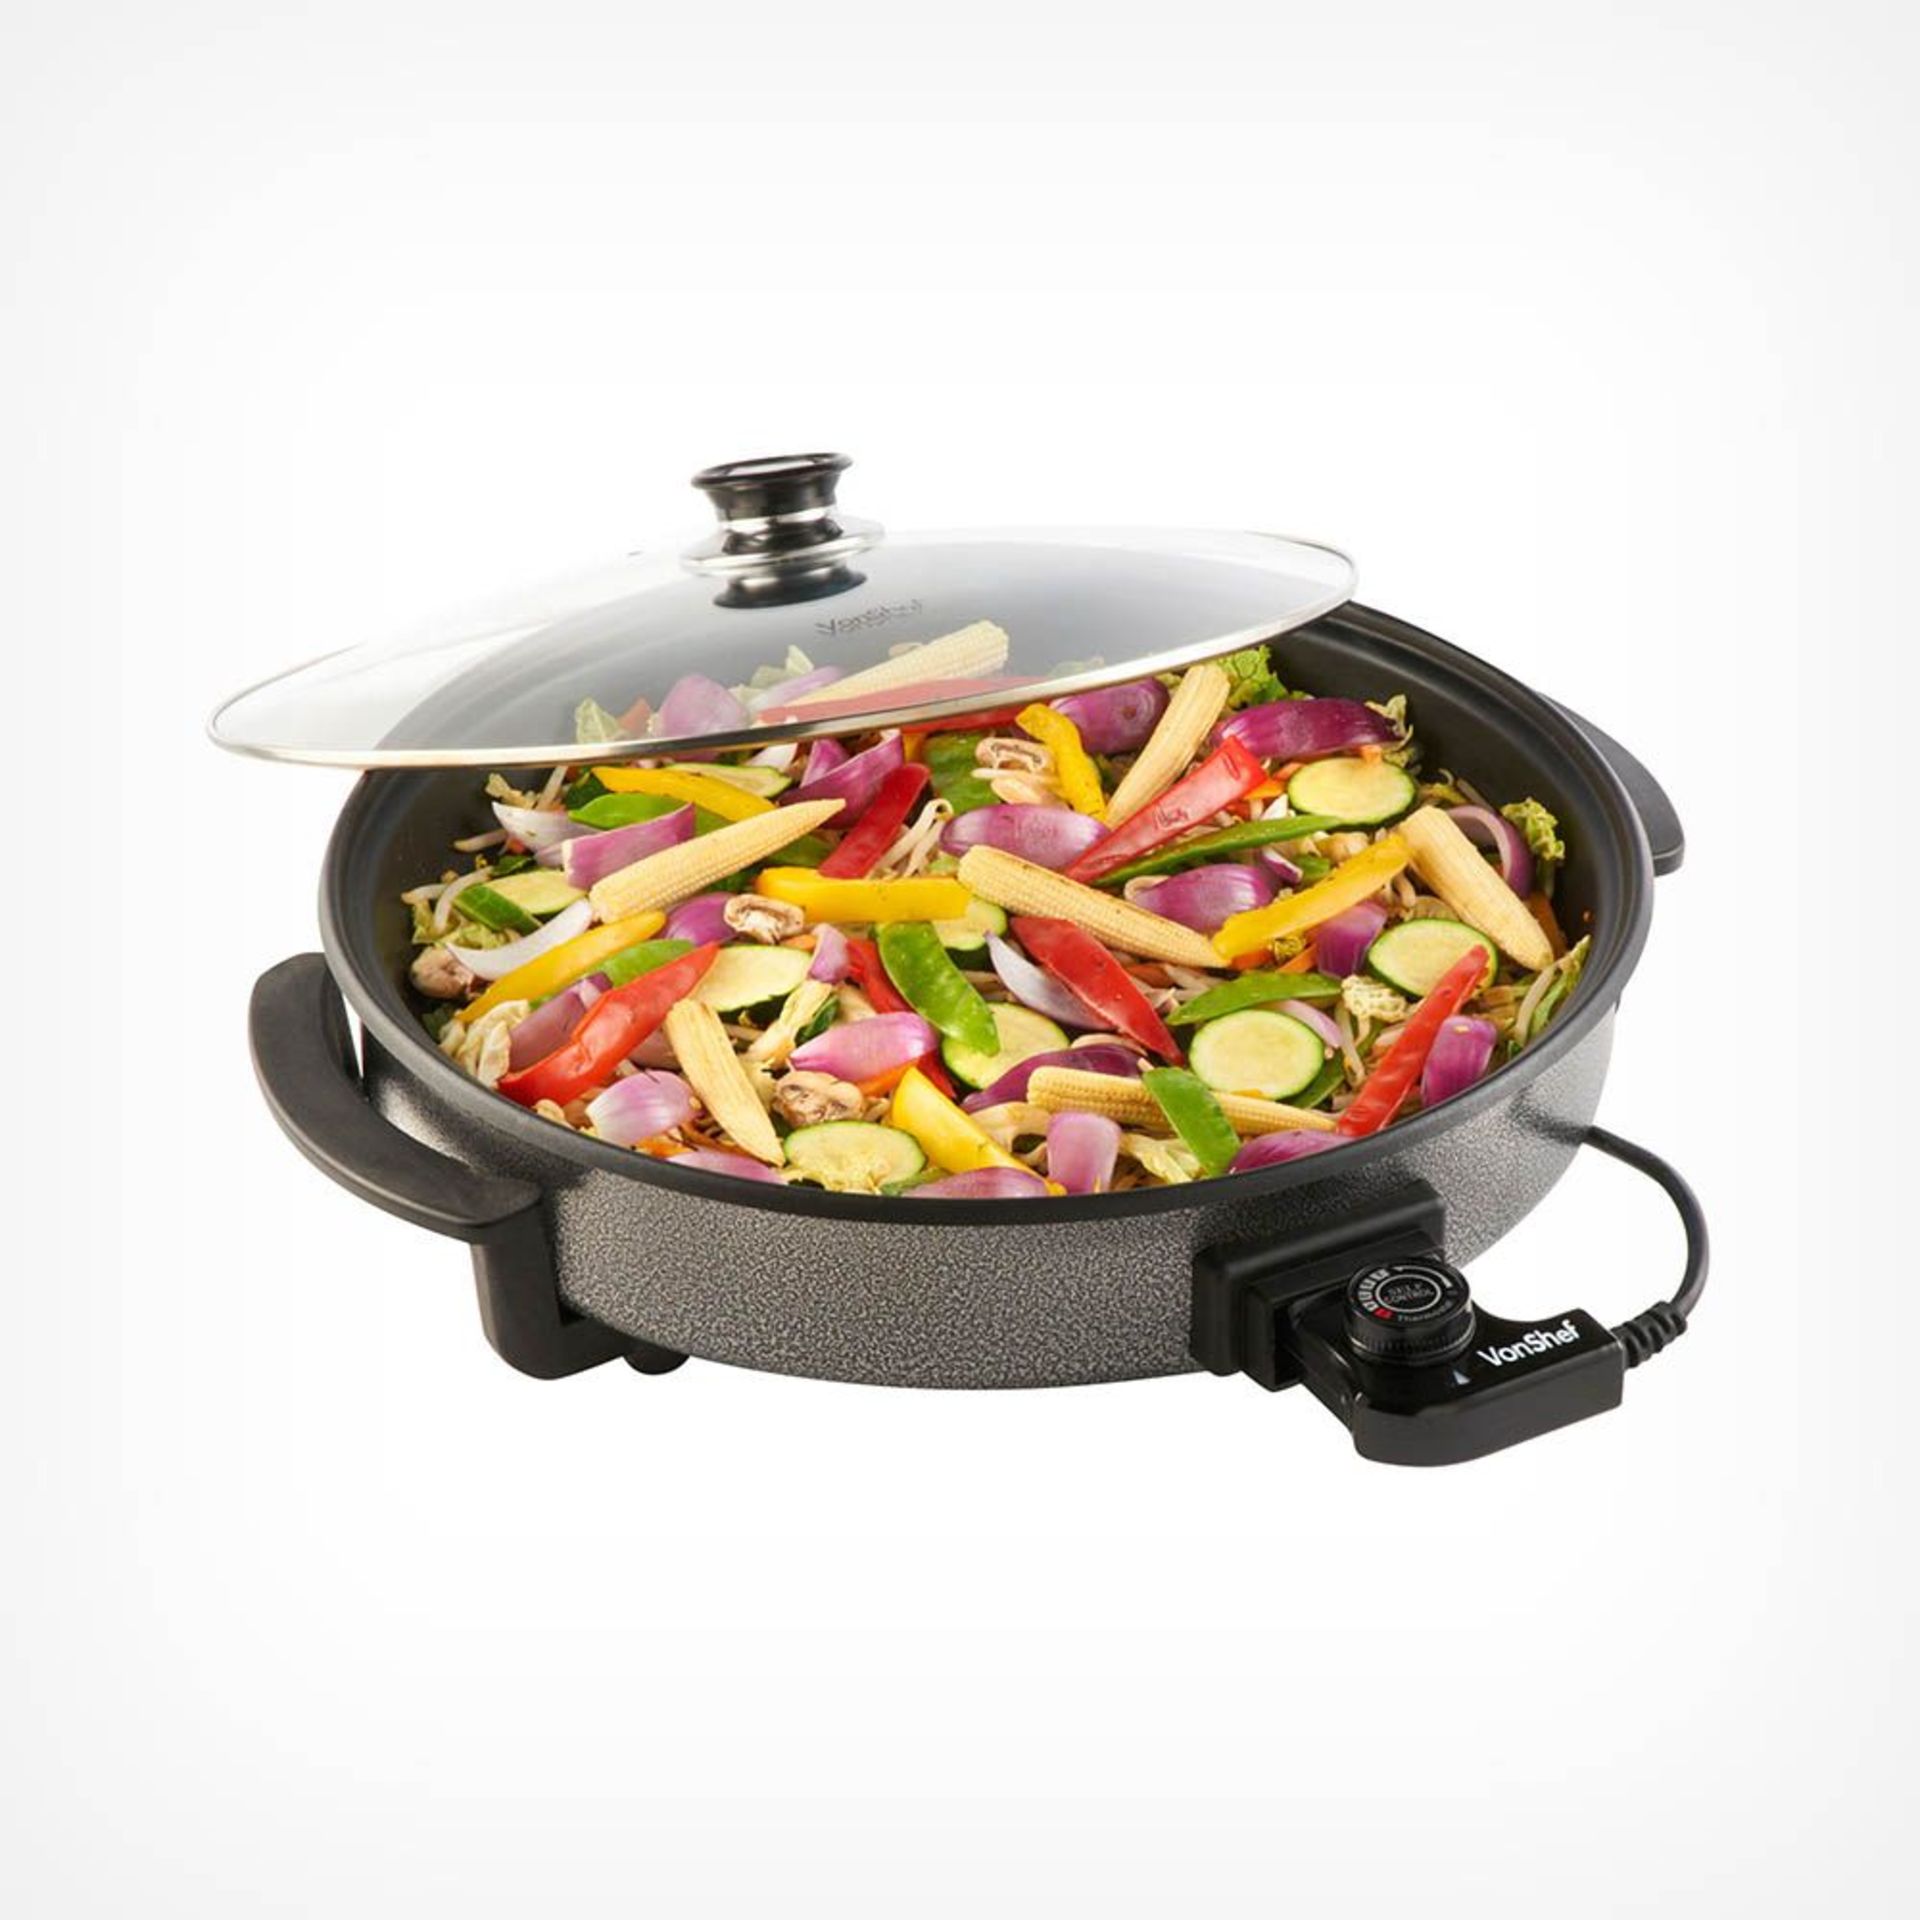 42cm Multi Cooker. - R8. The VonShef 42cm Multi Cooker is a must for the modern kitchen, making